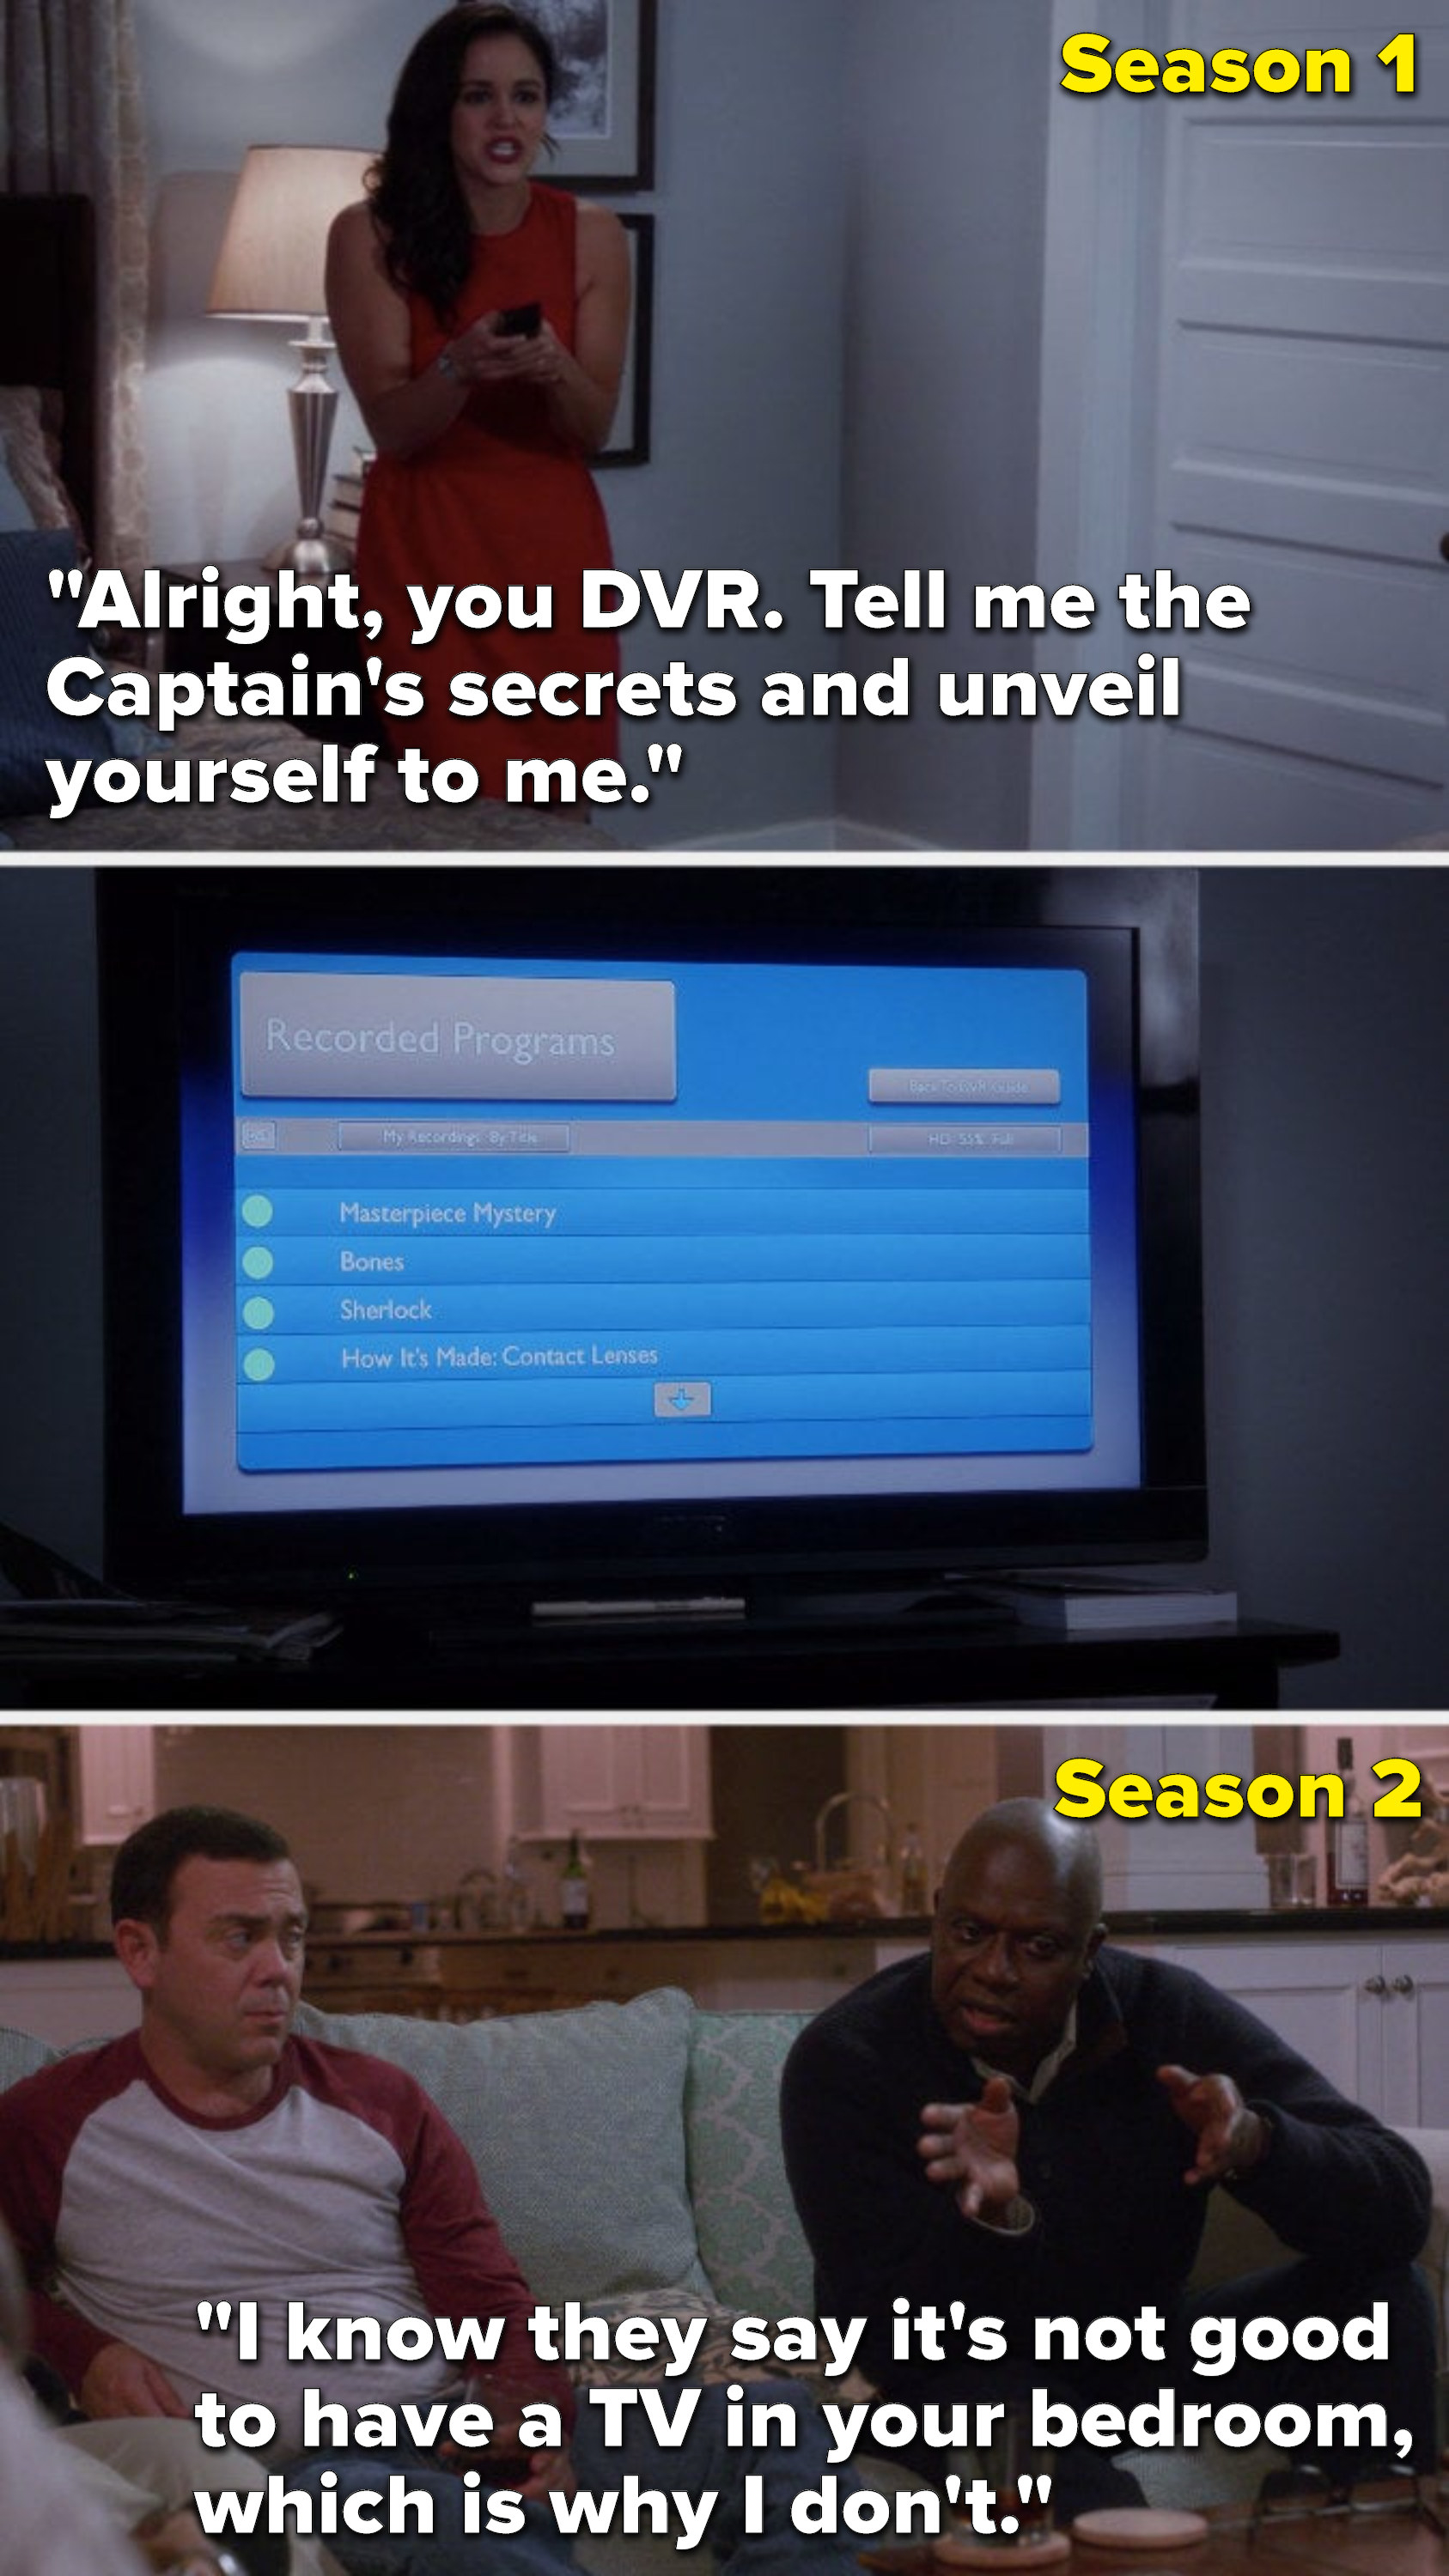 In Season 1, Amy&#x27;s in Holt&#x27;s bedroom and says, &quot;Alright, you DVR, tell me the Captain&#x27;s secrets and unveil yourself to me,&quot; but in Season 2 Holt says, &quot;I know they say it&#x27;s not good to have a TV in your bedroom, which is why I don&#x27;t&quot;